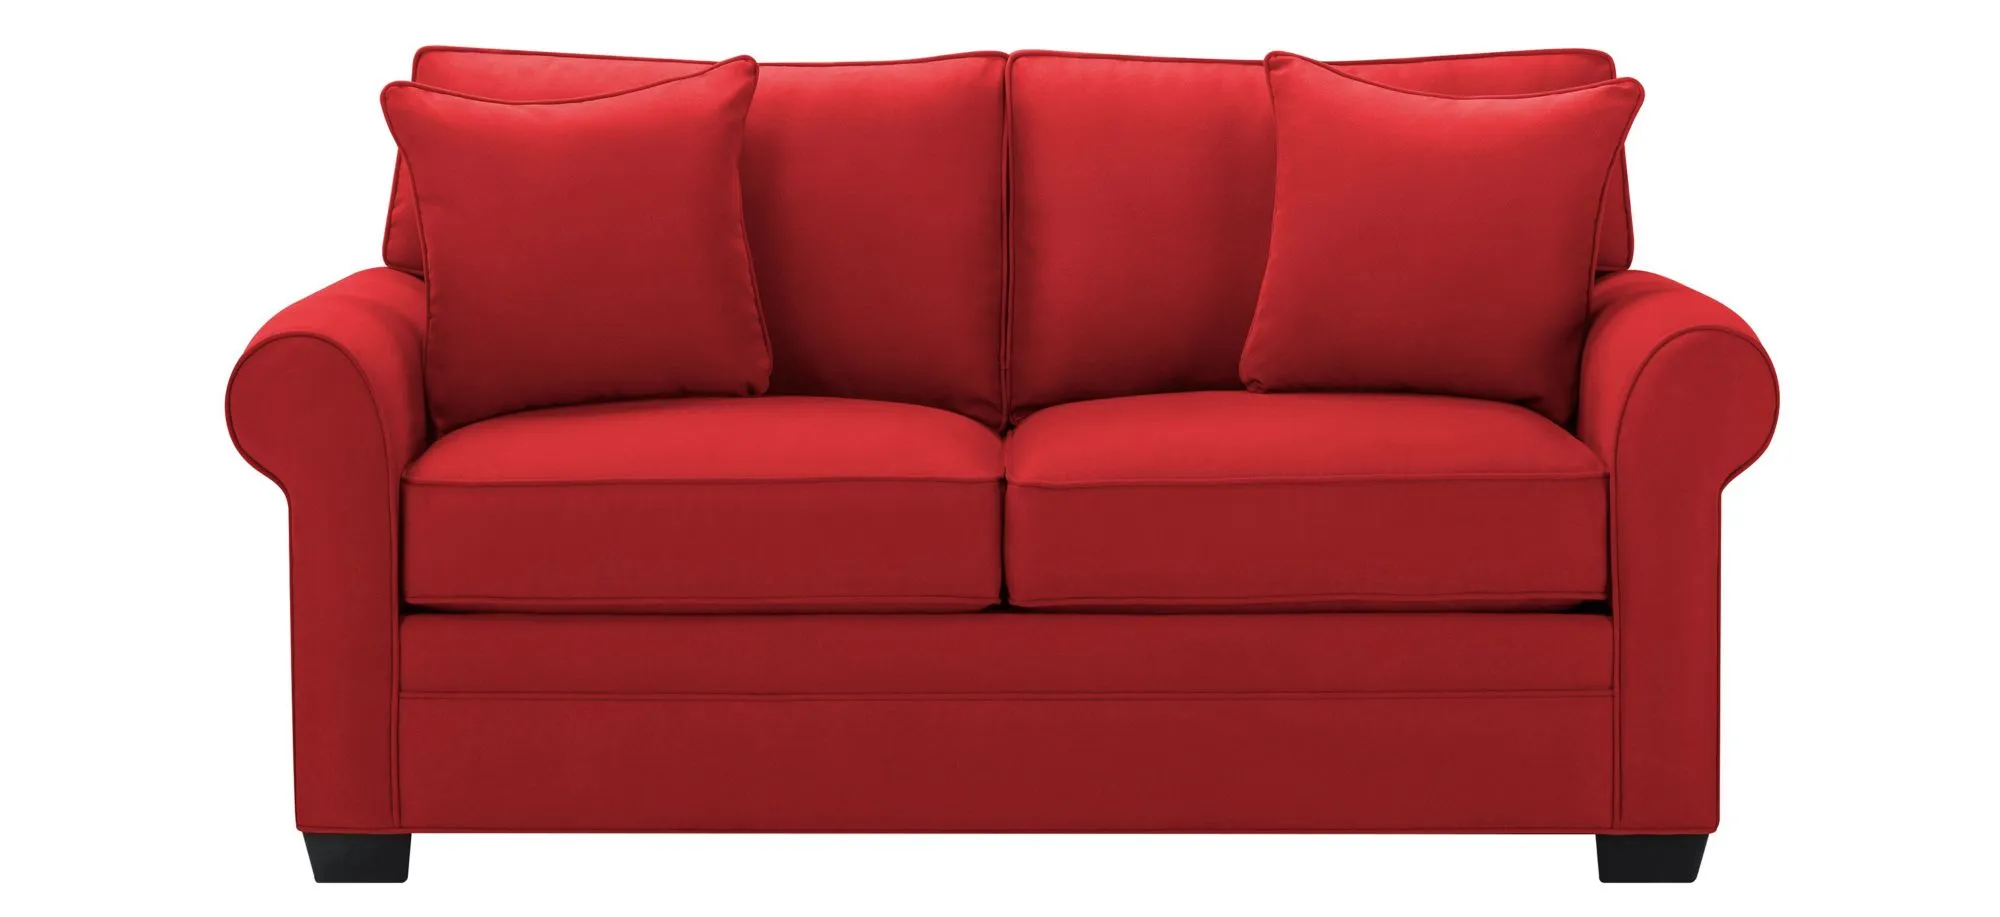 Glendora Apartment Sofa in Suede So Soft Cardinal by H.M. Richards